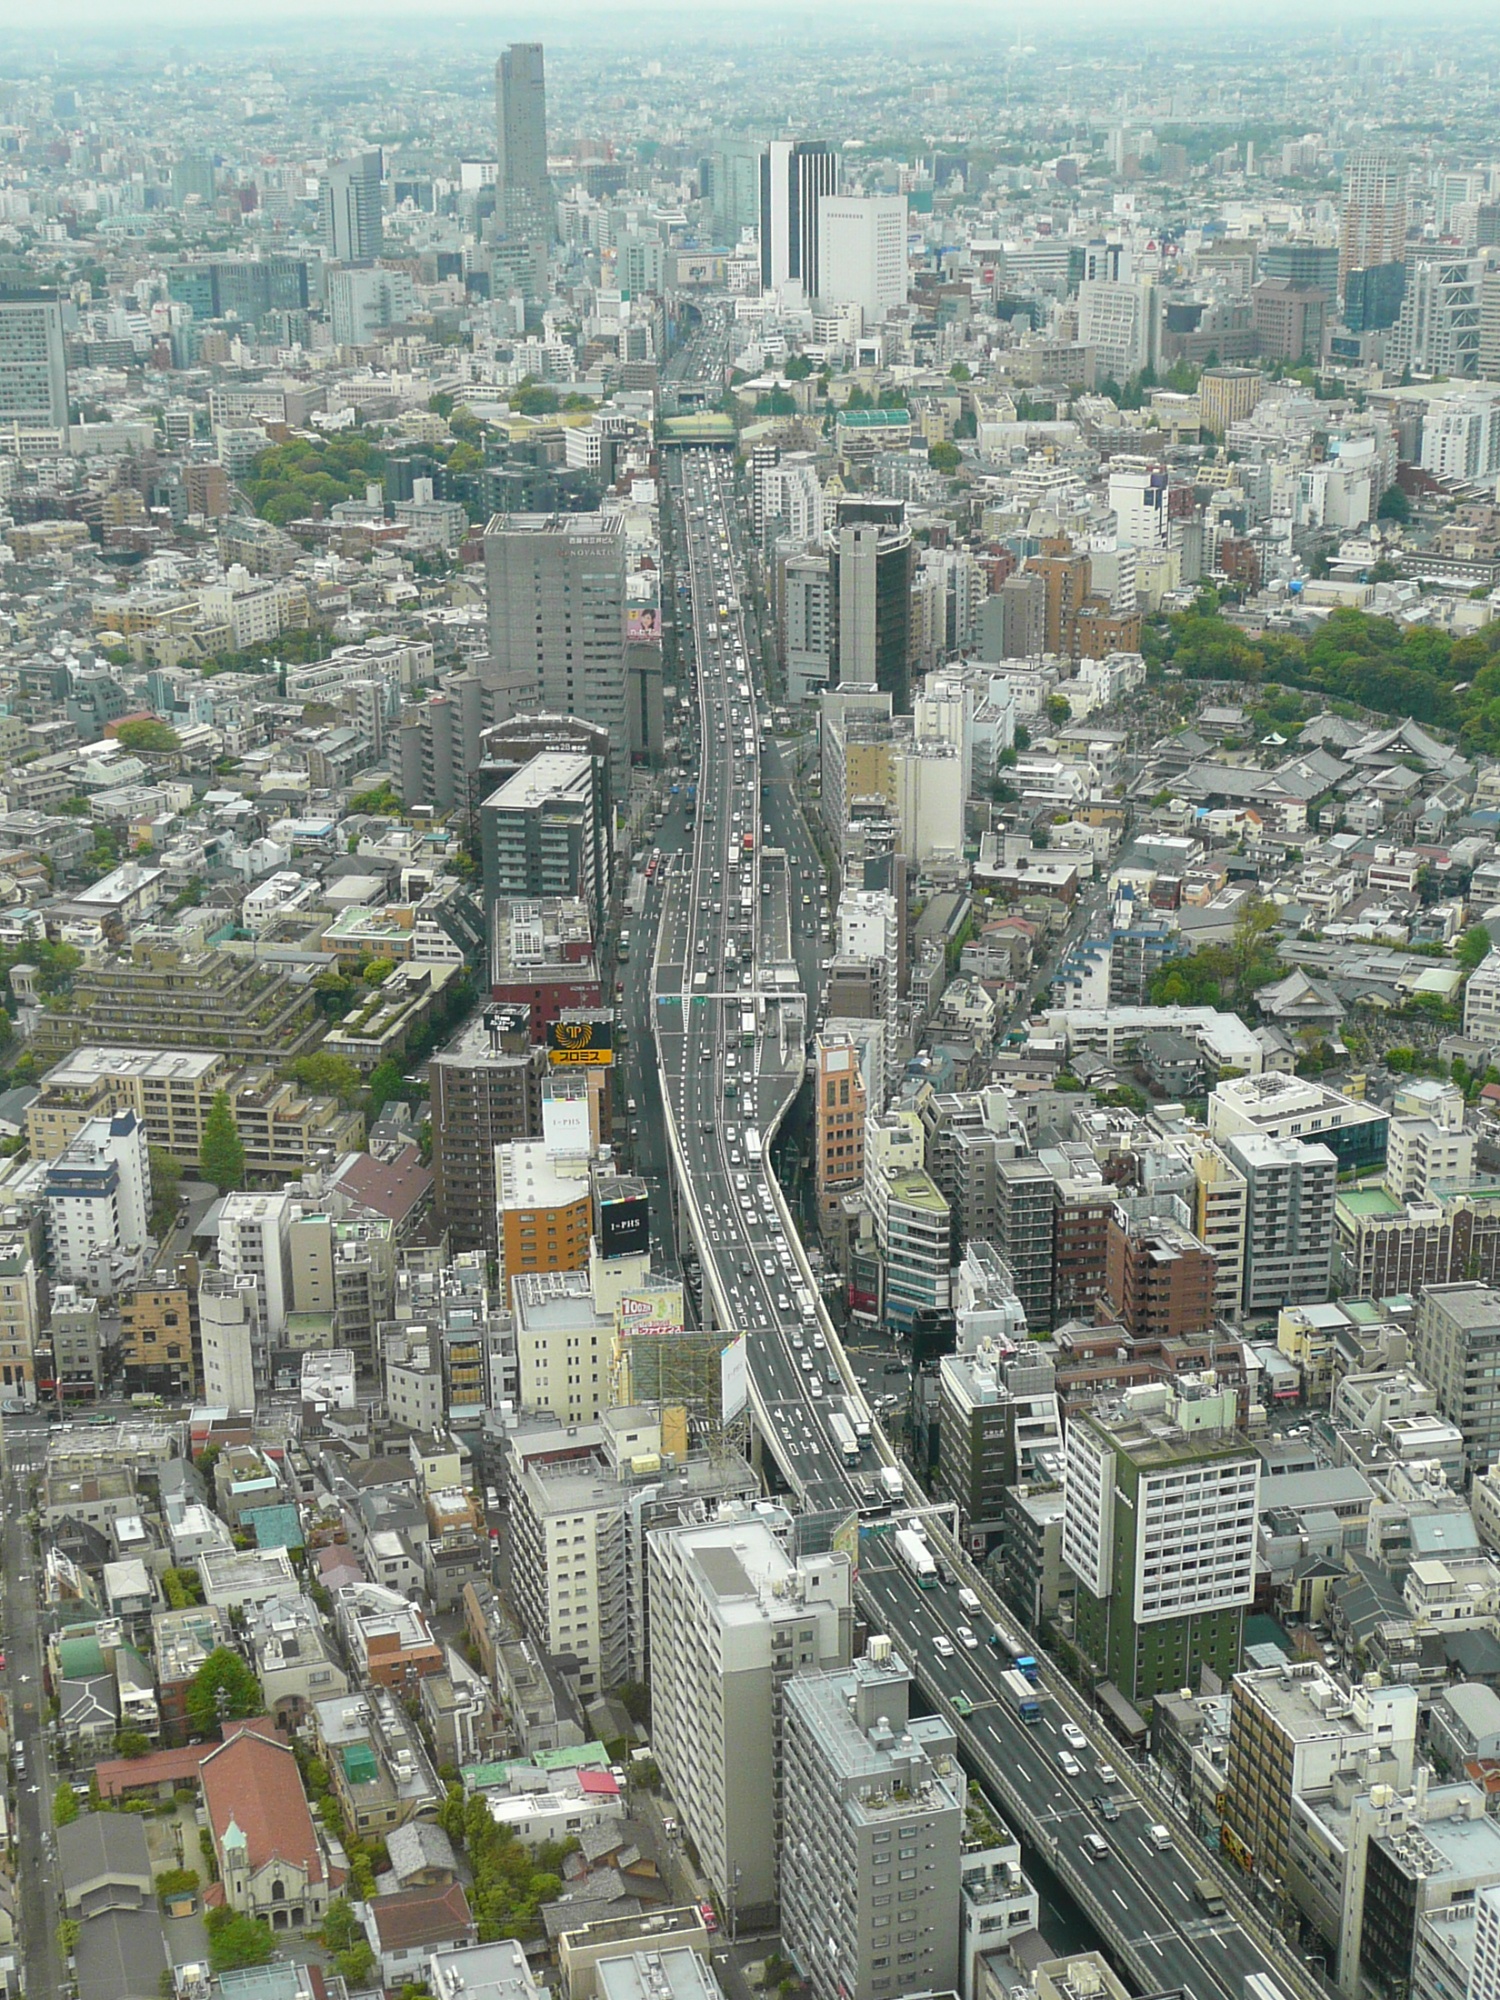 Route 3 (Shuto Expressway) as seen from Roppongi Hills Mori Tower